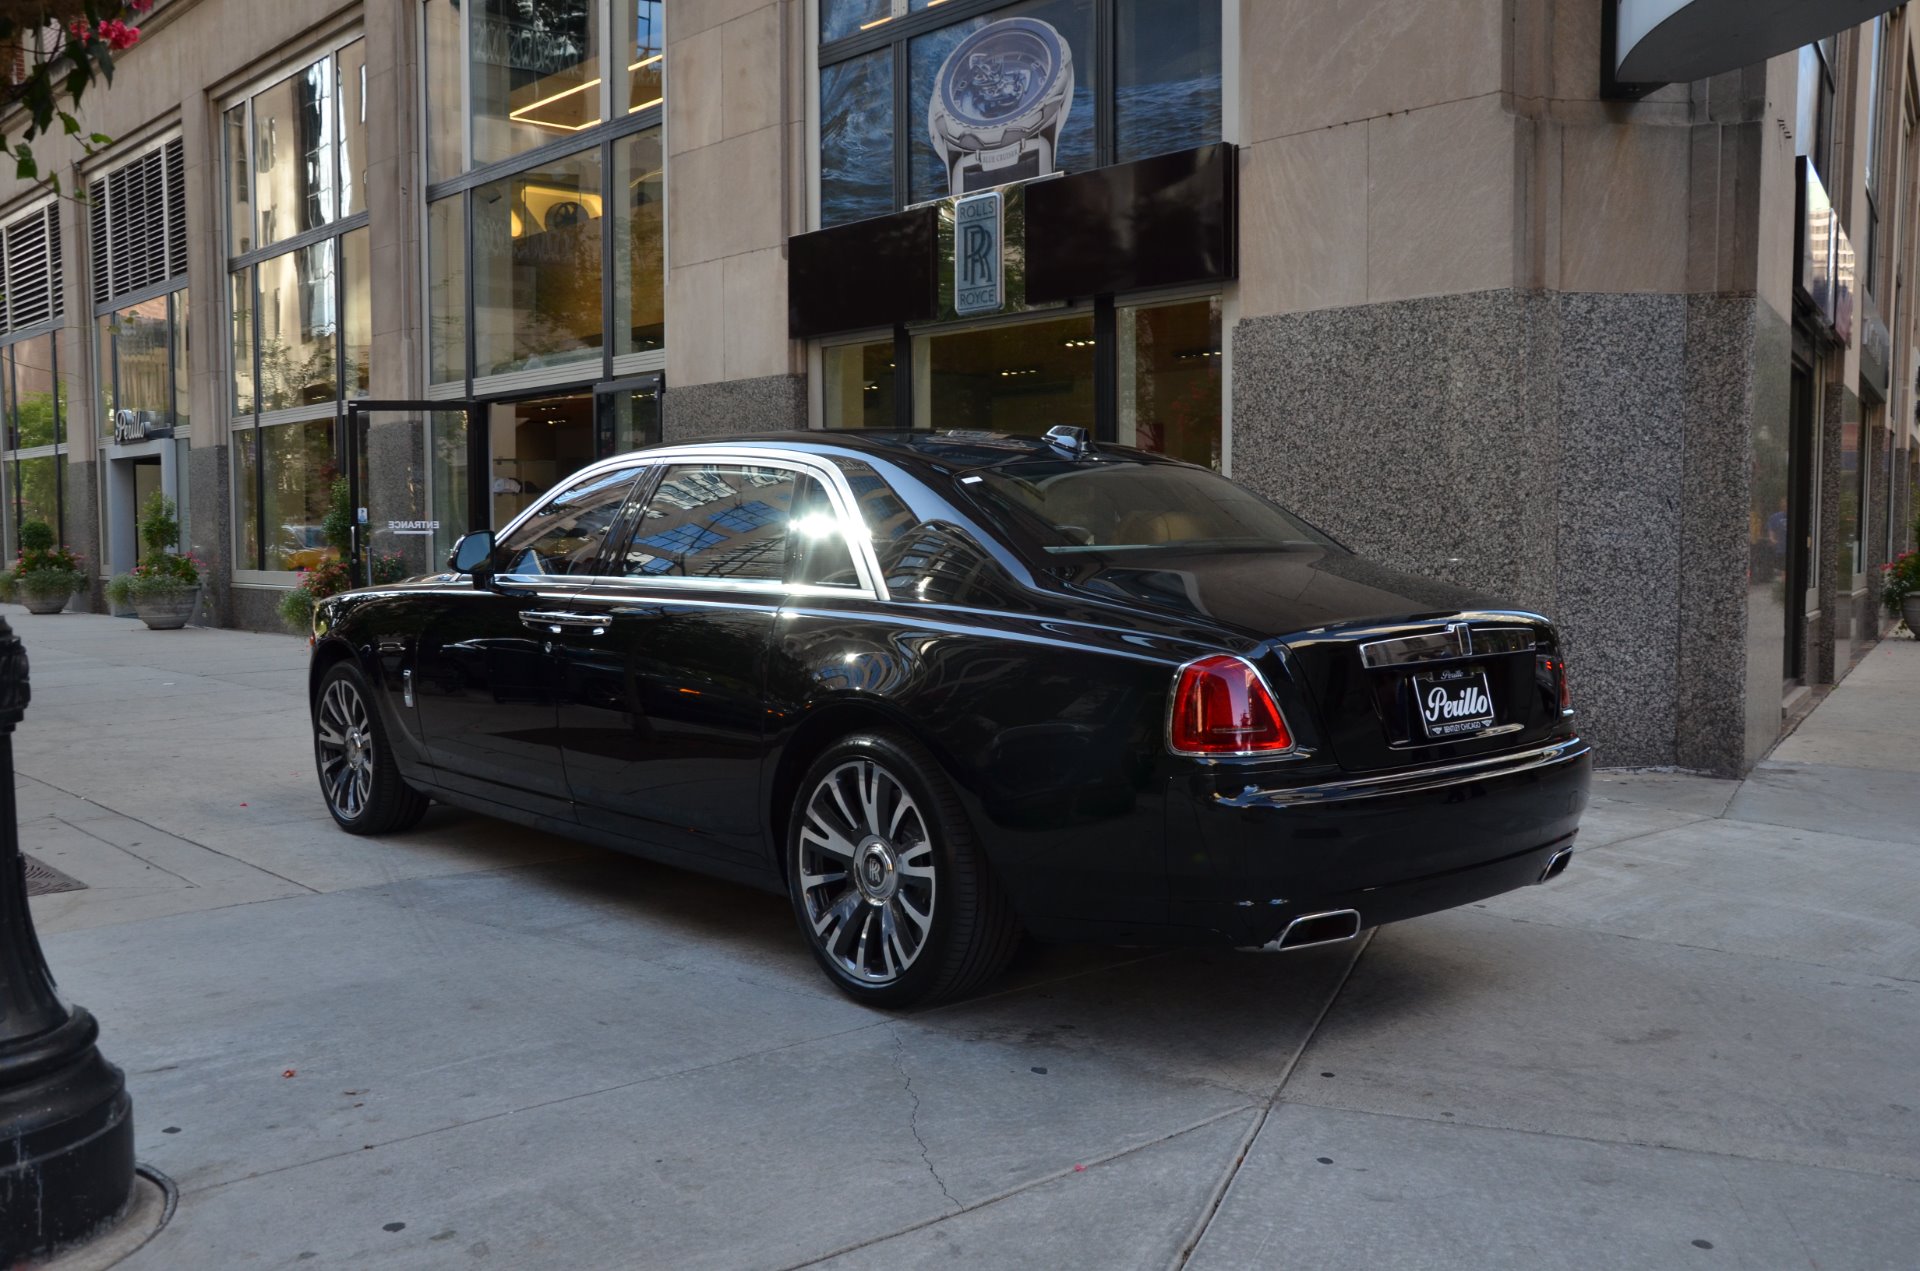 New 2018 RollsRoyce Ghost EXTENDED WHEELBASE EWB For Sale Sold  Bentley  Gold Coast Chicago Stock R440S